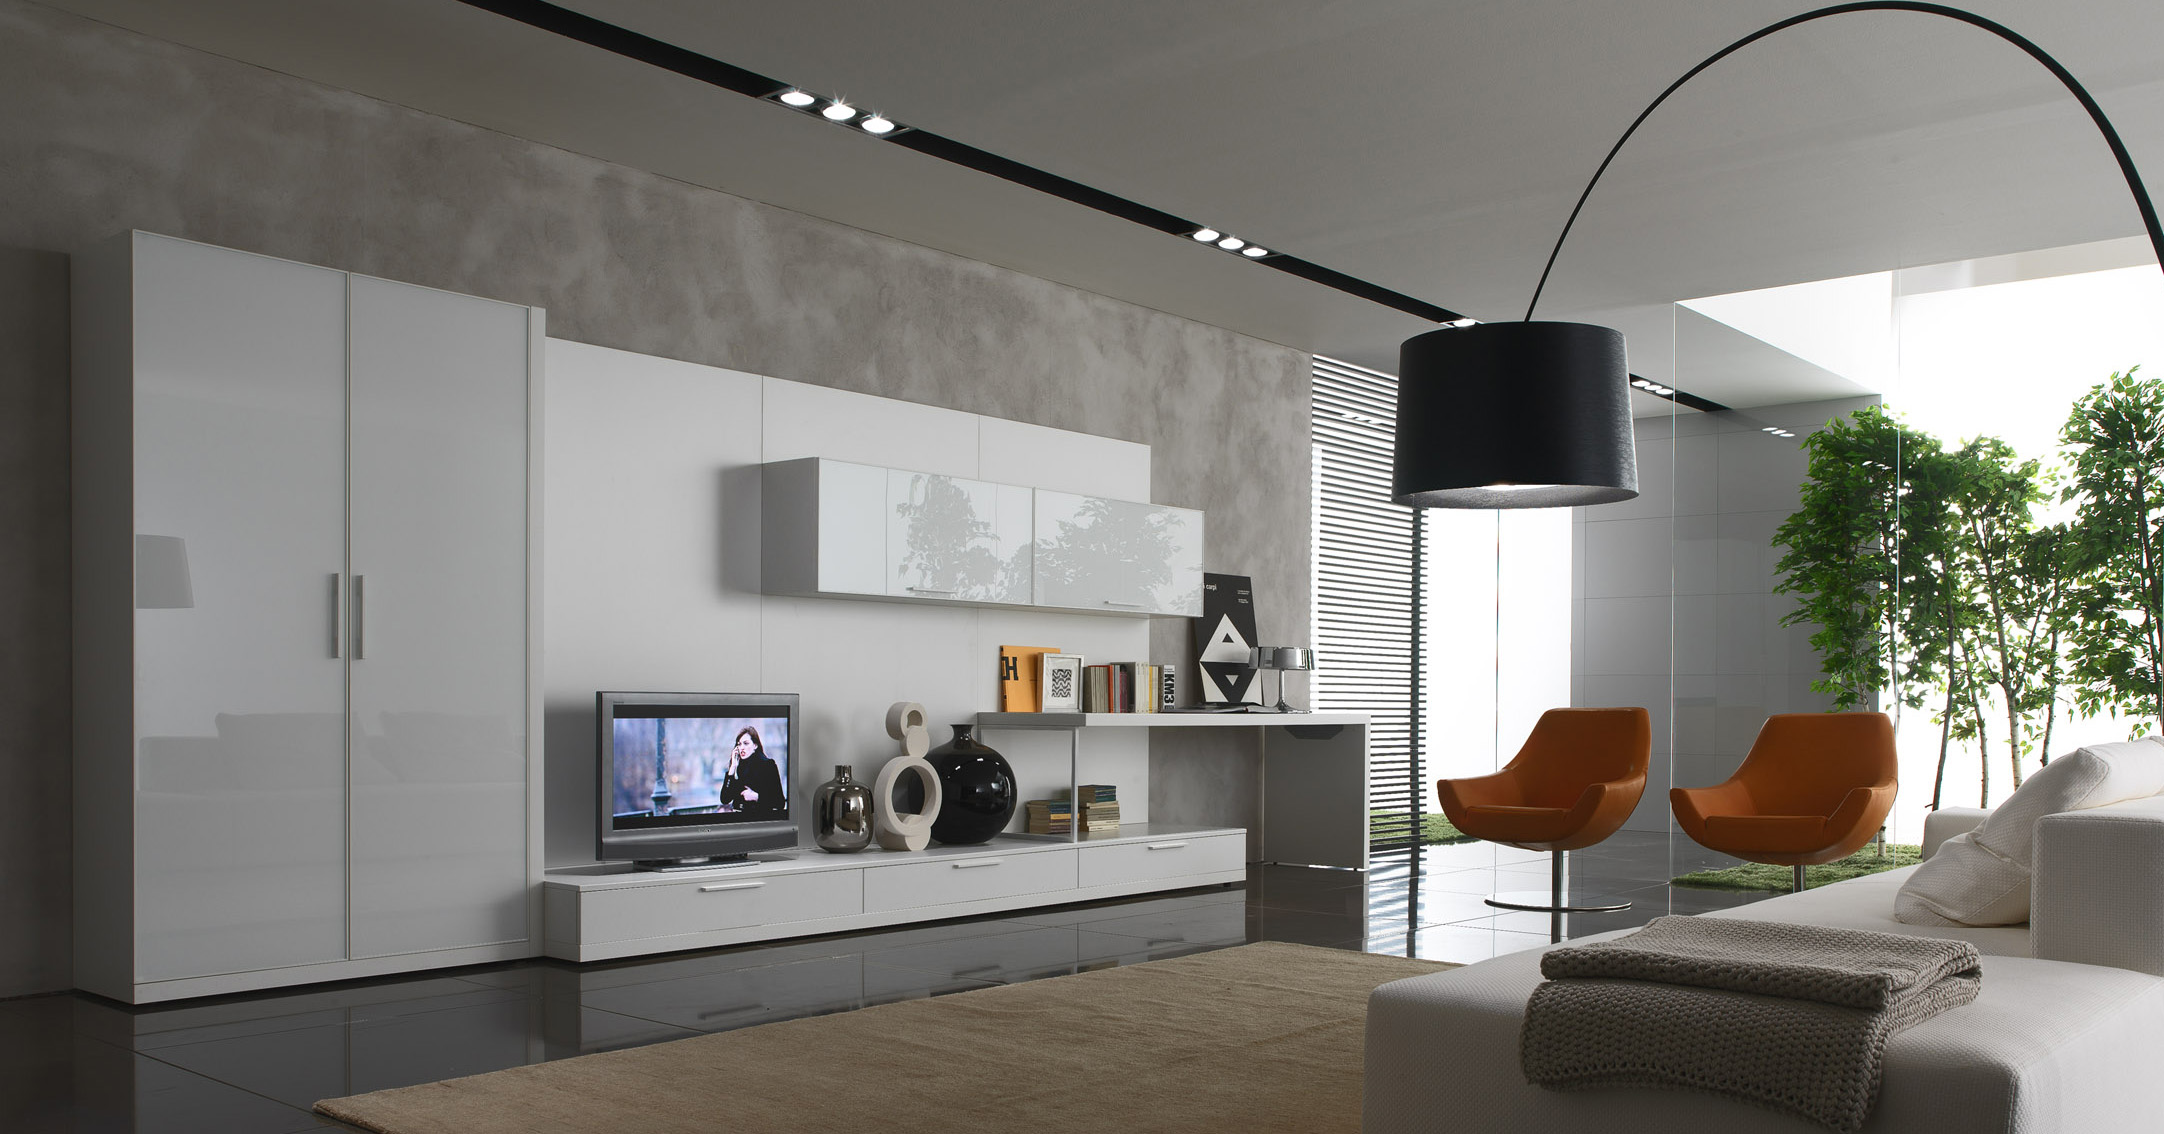 Interior Design Of The Living Rooms